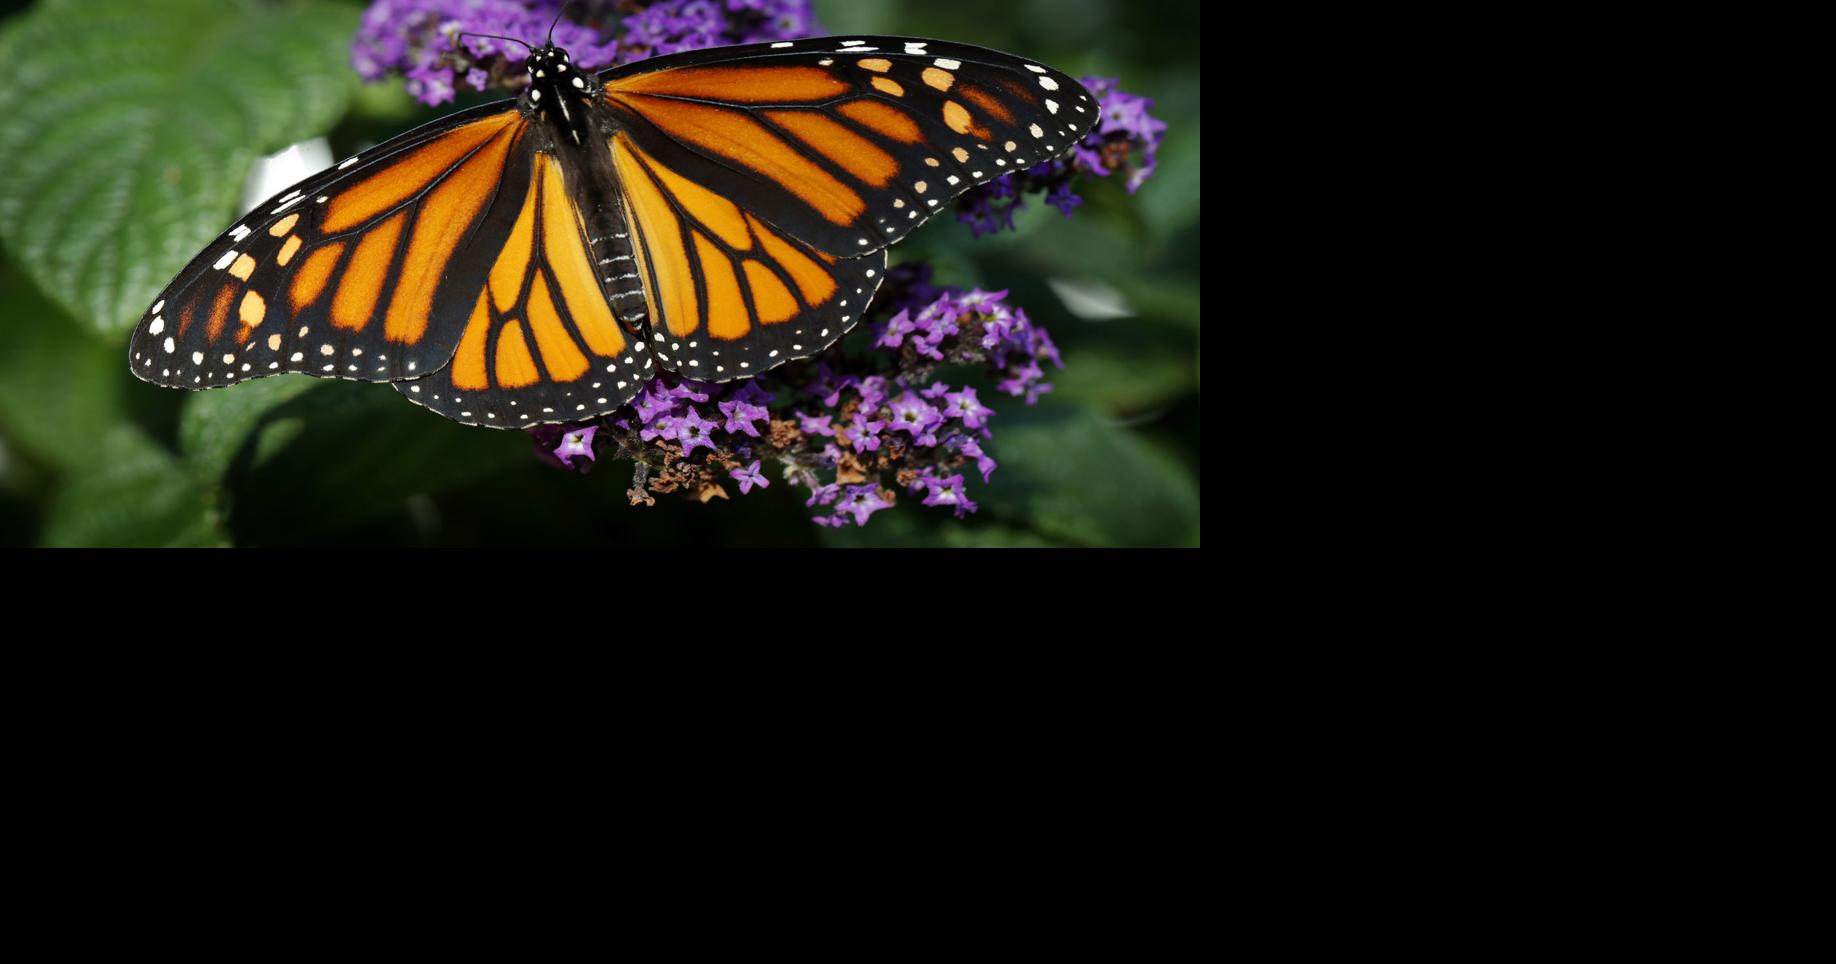 Mexico's monarch butterflies are falling victim to a real-life